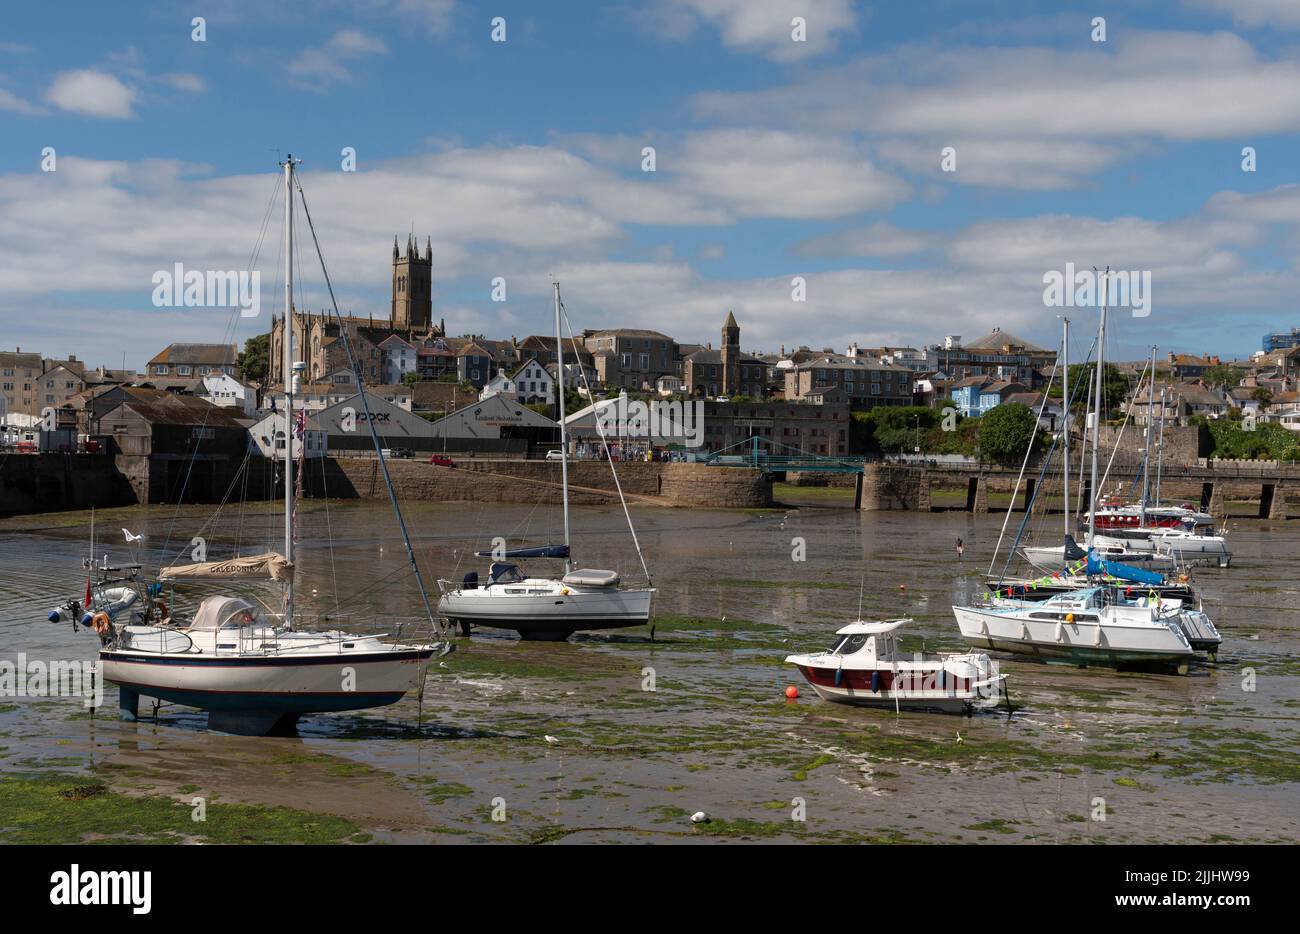 Penzance, Cornwall, England, UK. 2022. Penzance Harbour with boats settled on the mud with a backdrop of the town centre. Cornwall UK. Stock Photo